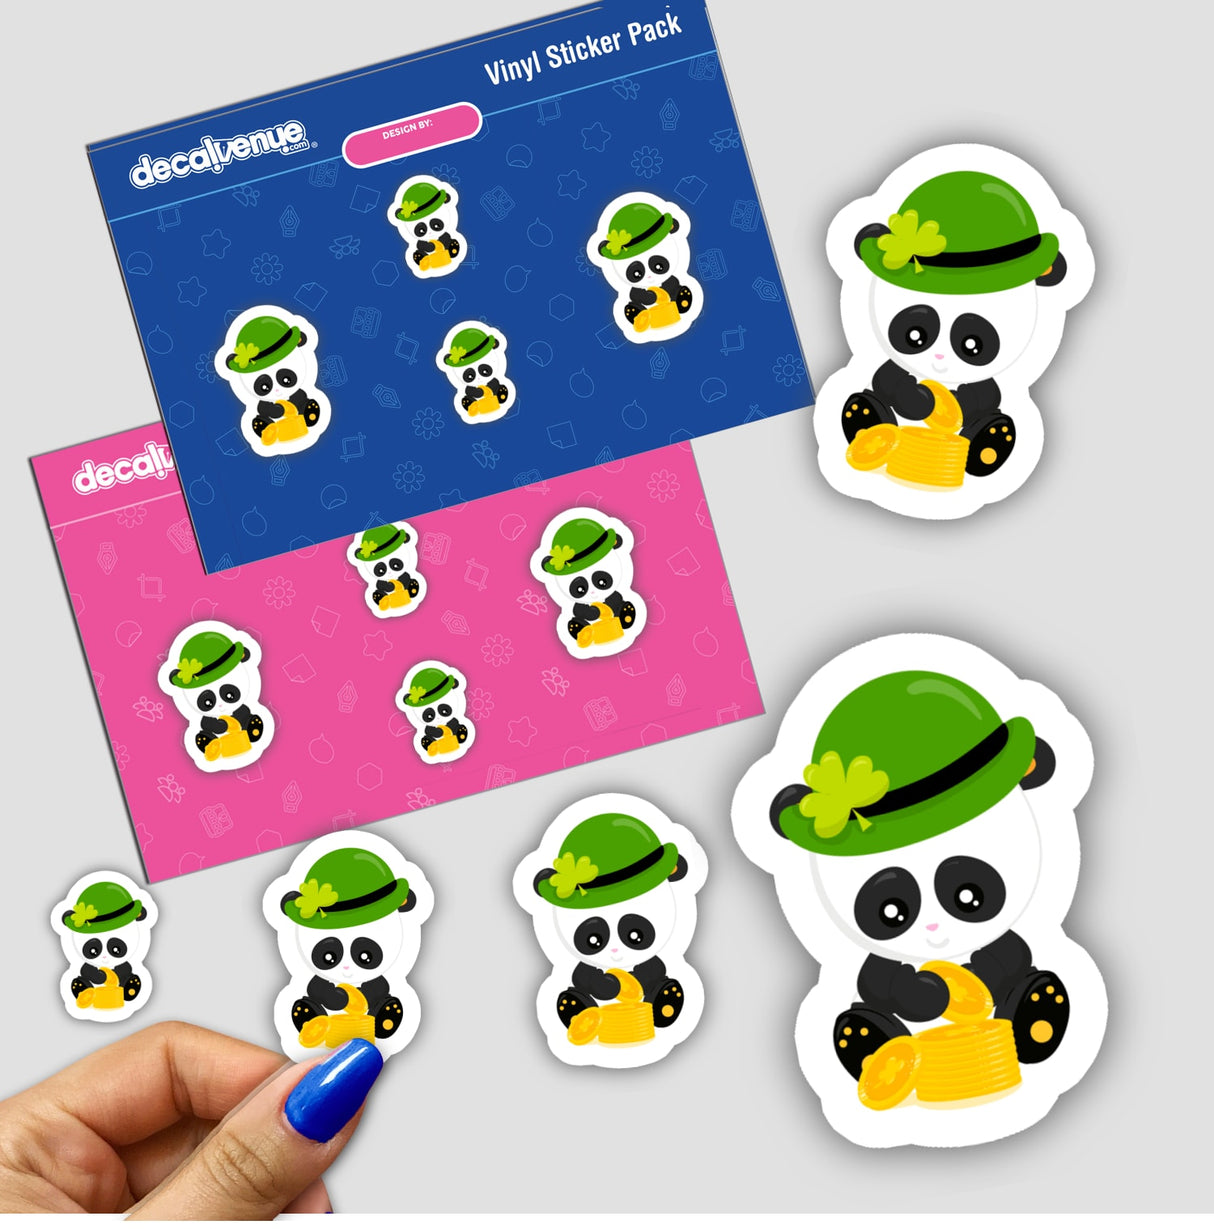 St Patrick's Day Panda with gold coins Sticker